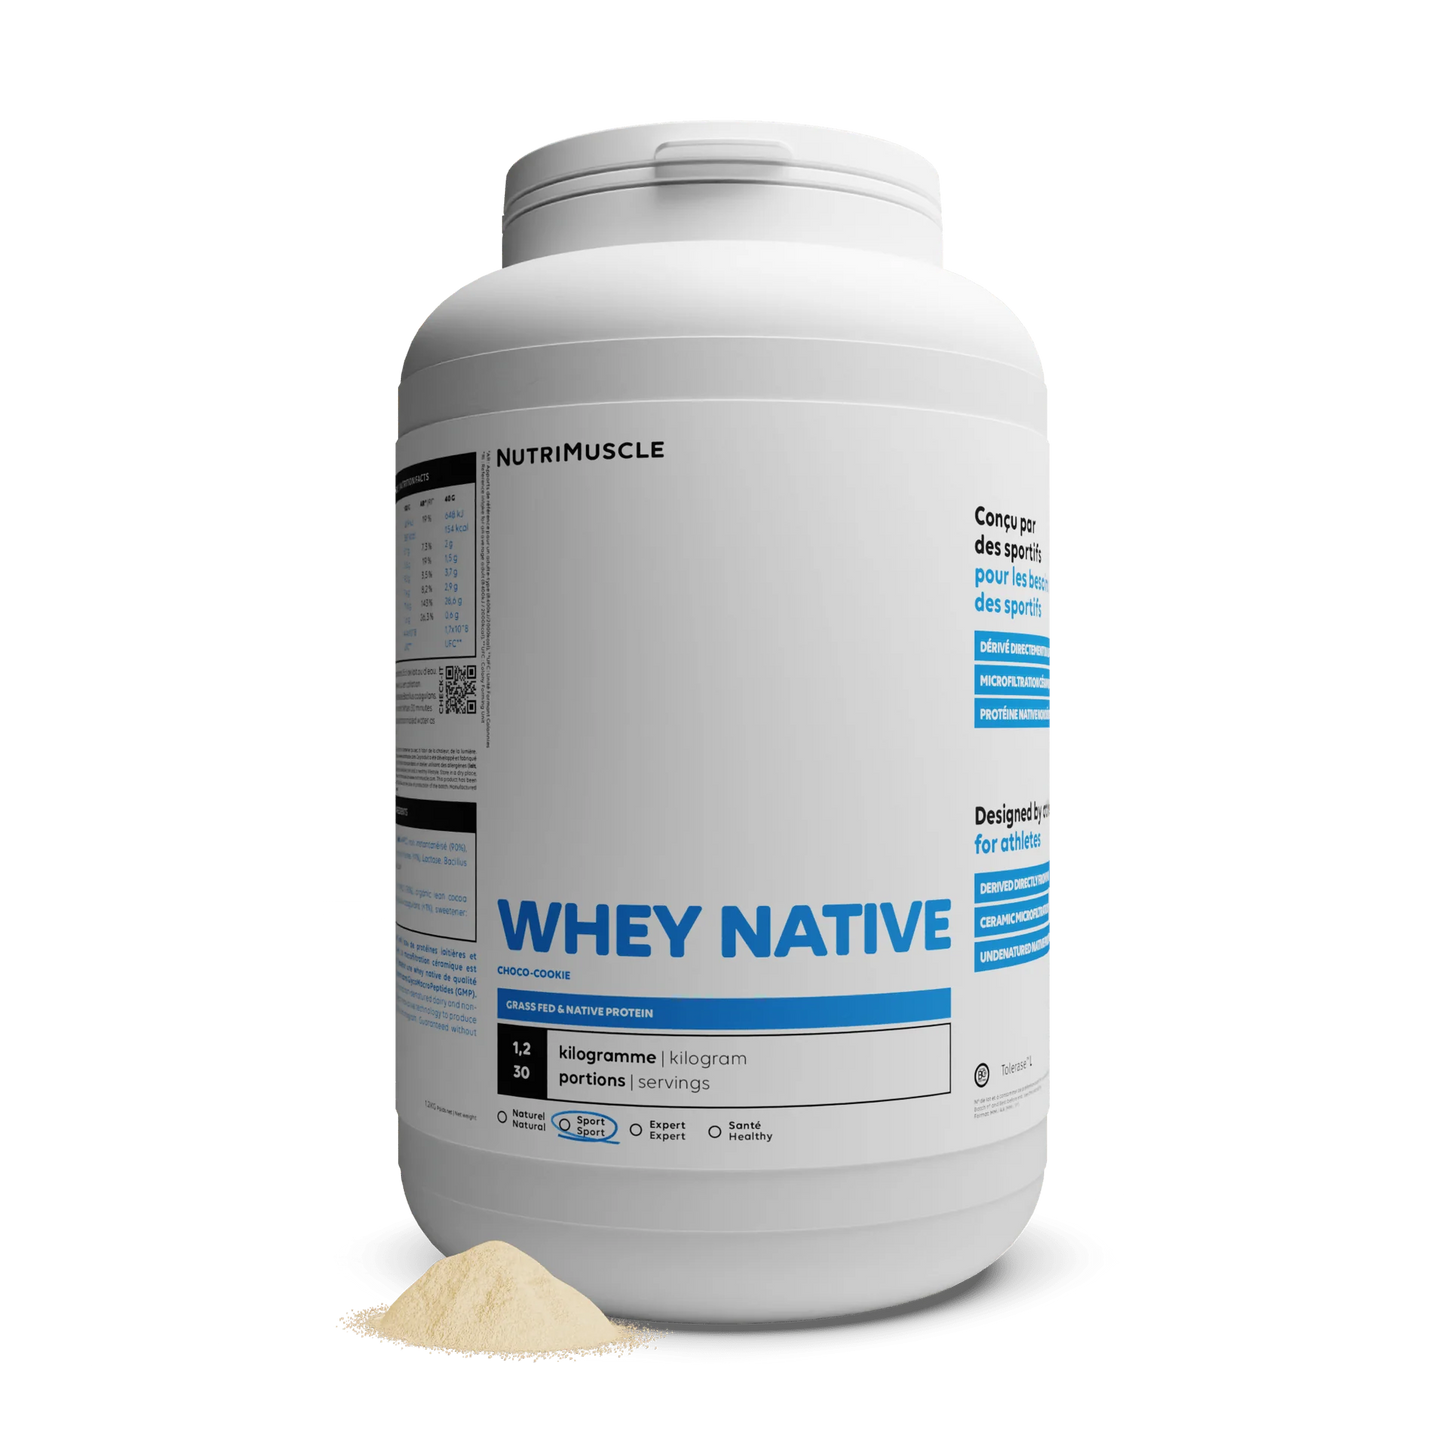 Whey Native - NUTRIMUSCLE